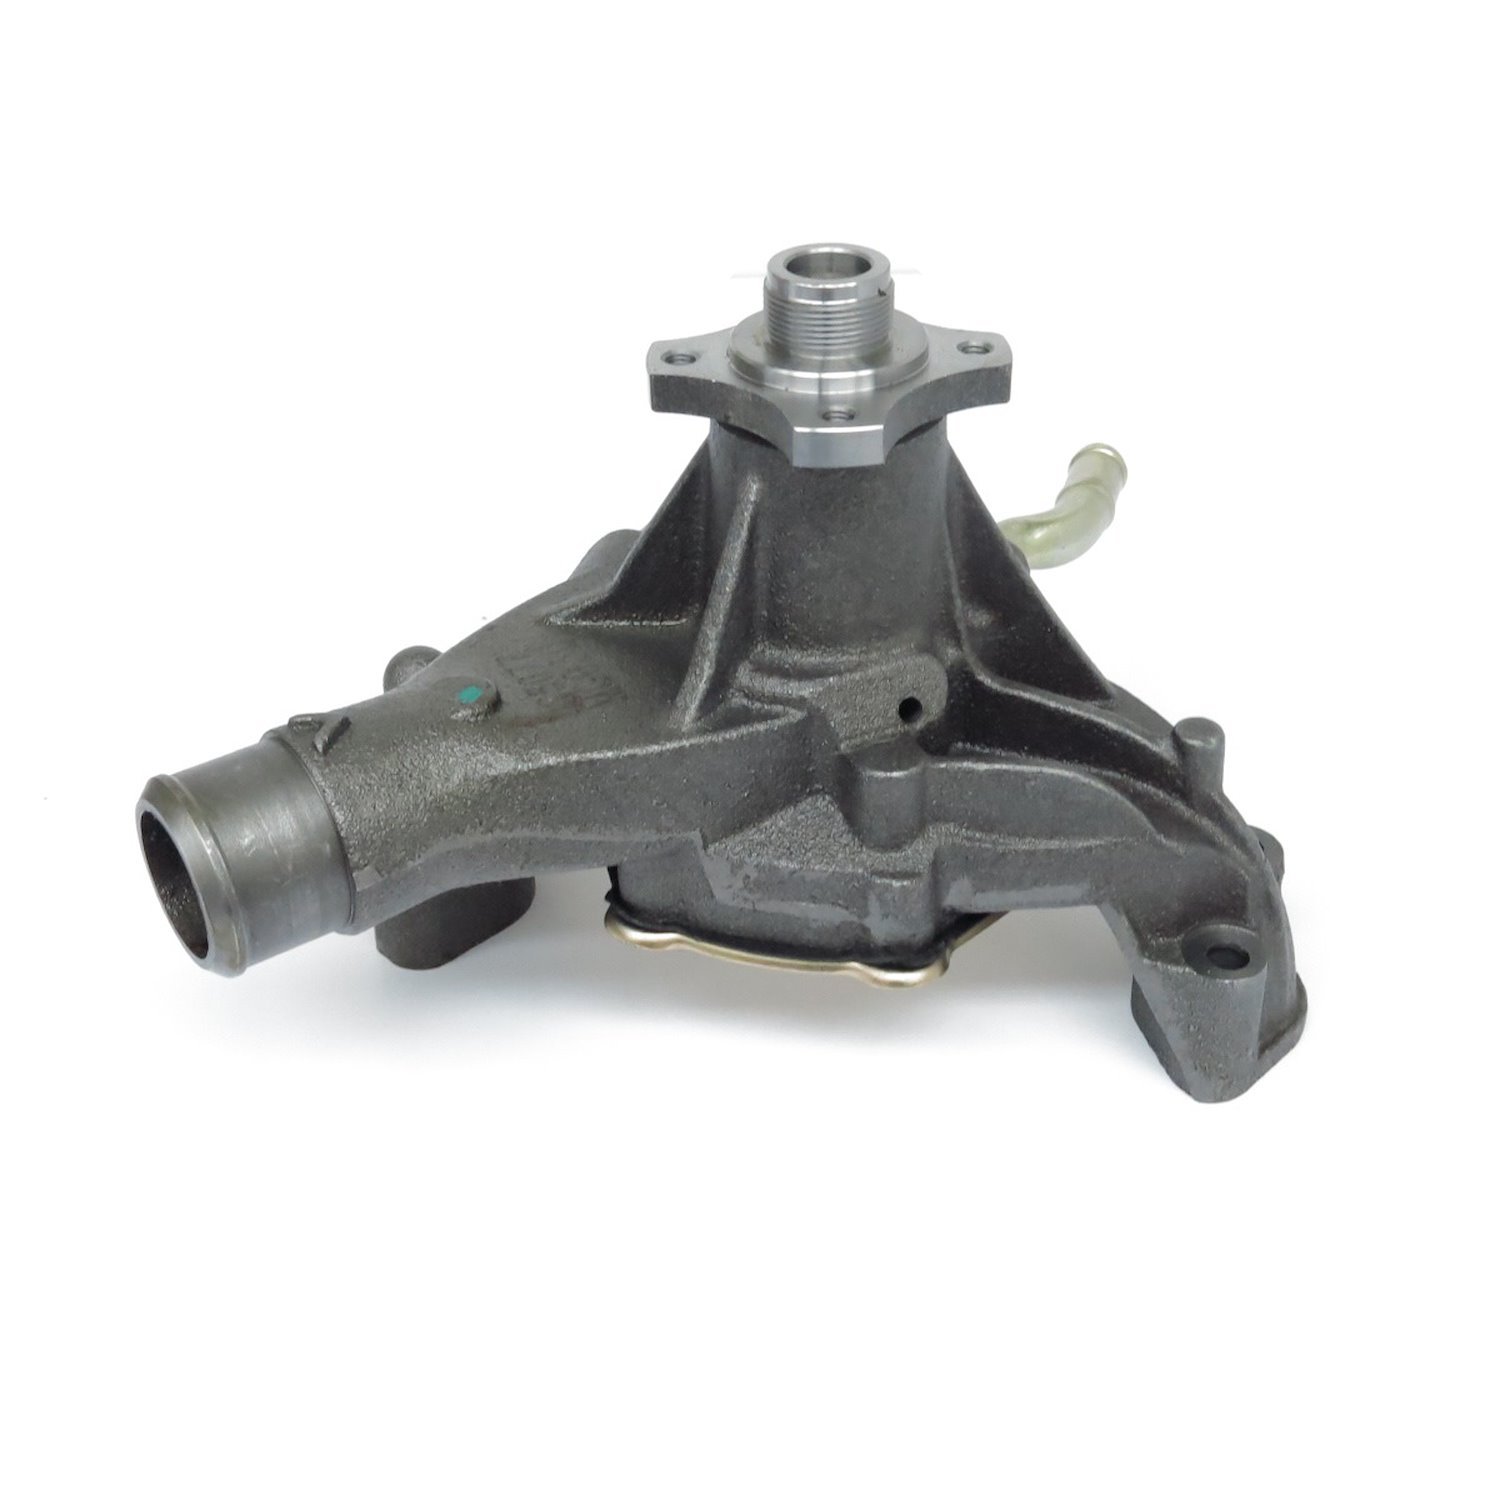 US Motor Works Water Pump for 1996-2011 Small Block Chevy Vortec 5.0/5.7L & 4.3L V6